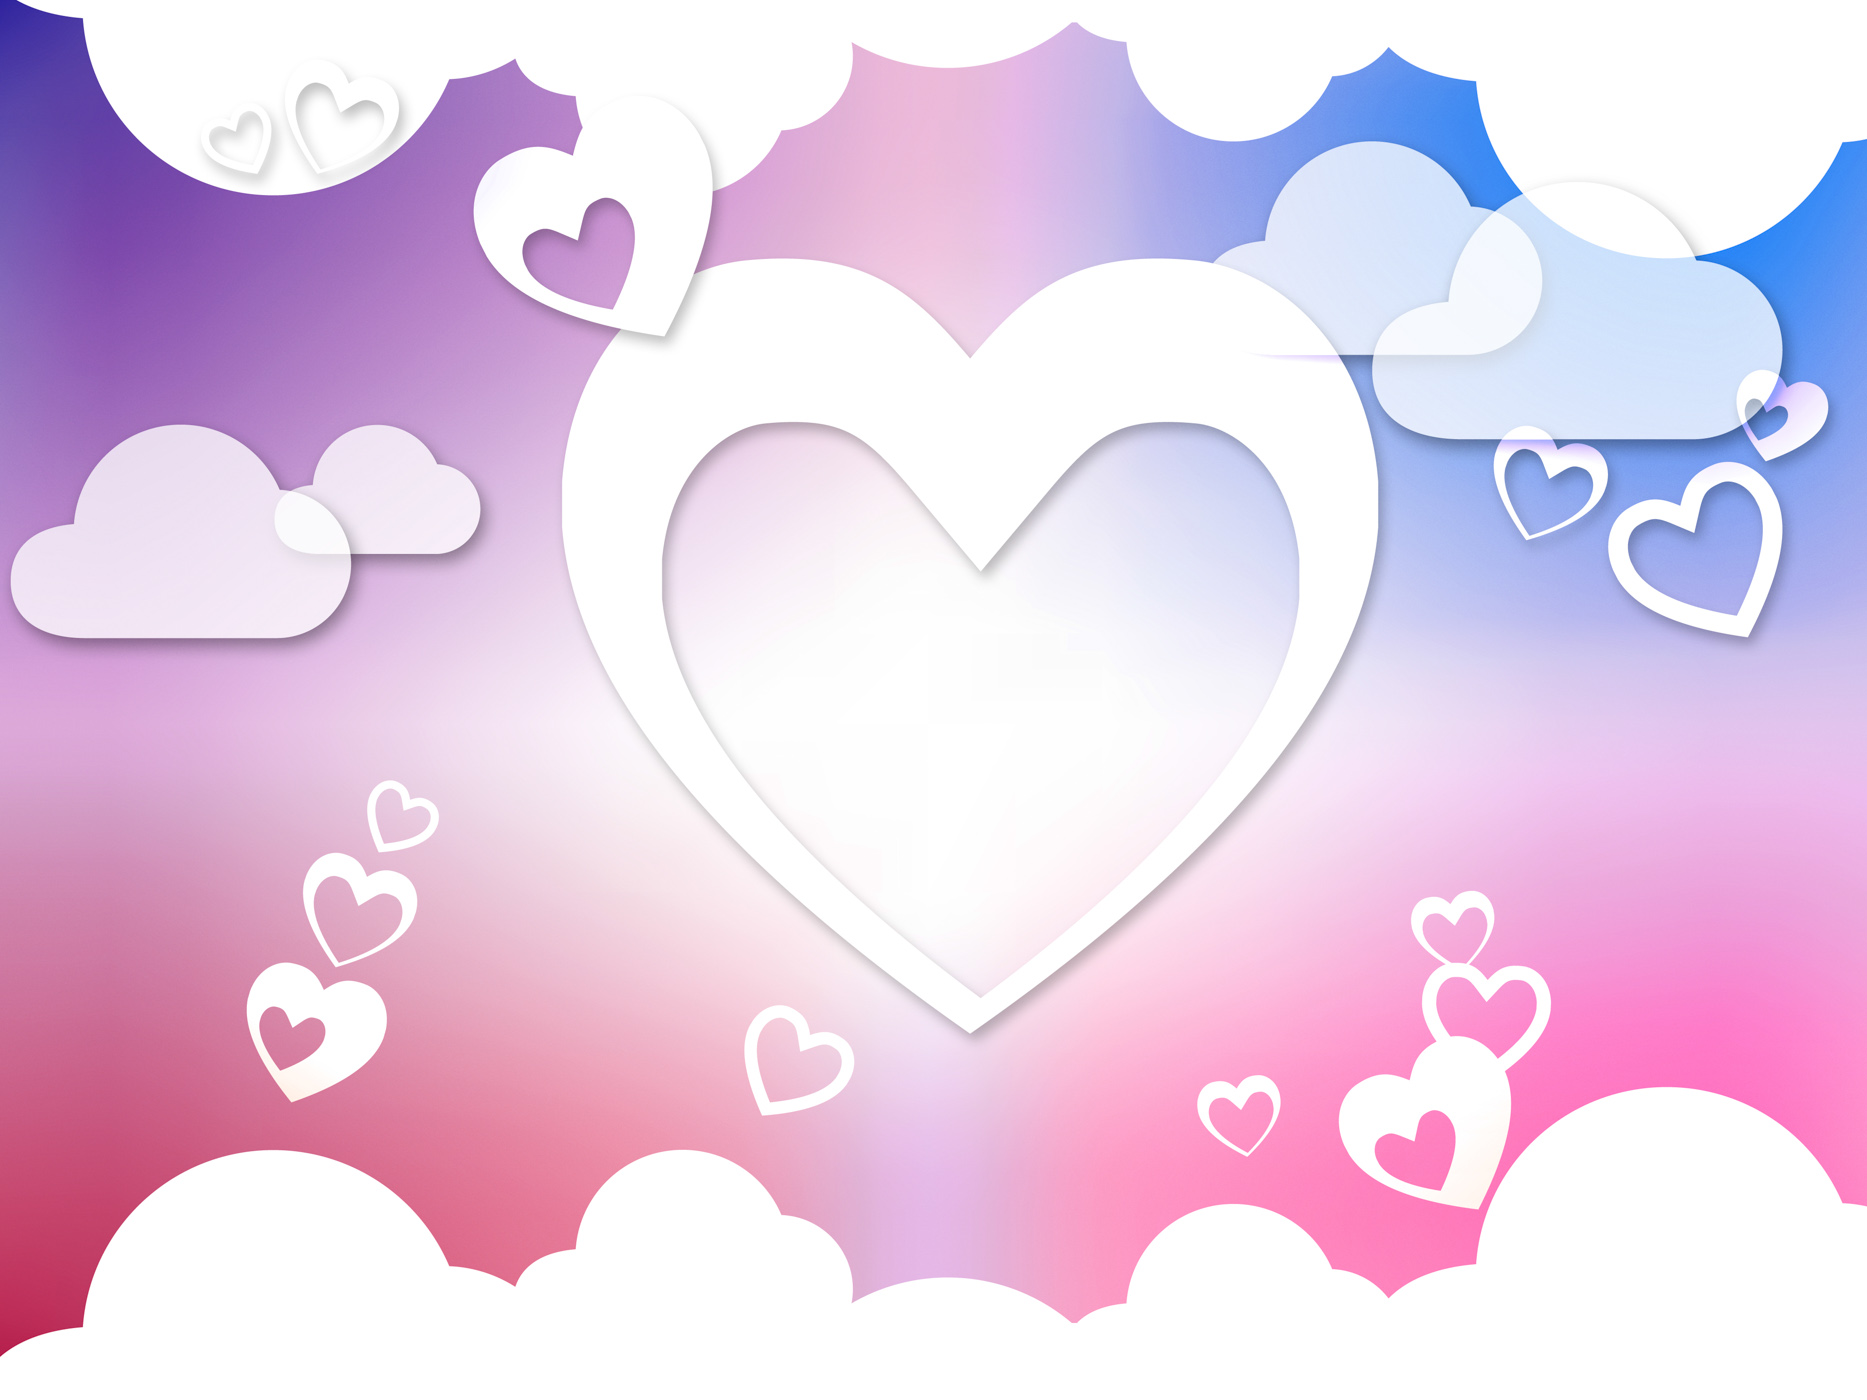 Hearts and clouds background means romantic dreams and feelings photo